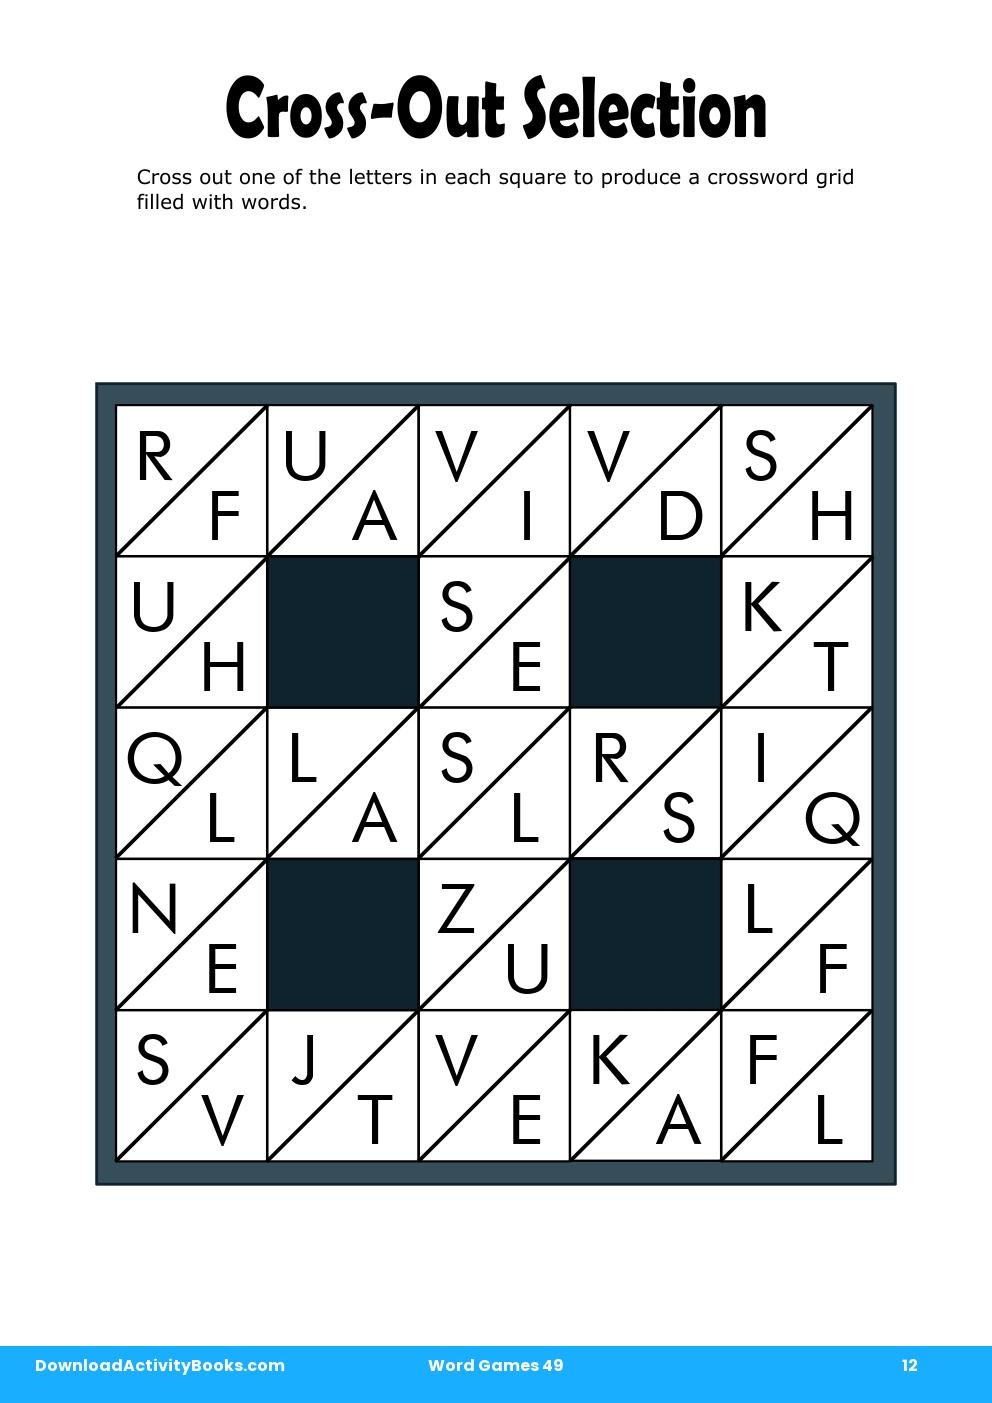 Cross-Out Selection in Word Games 49